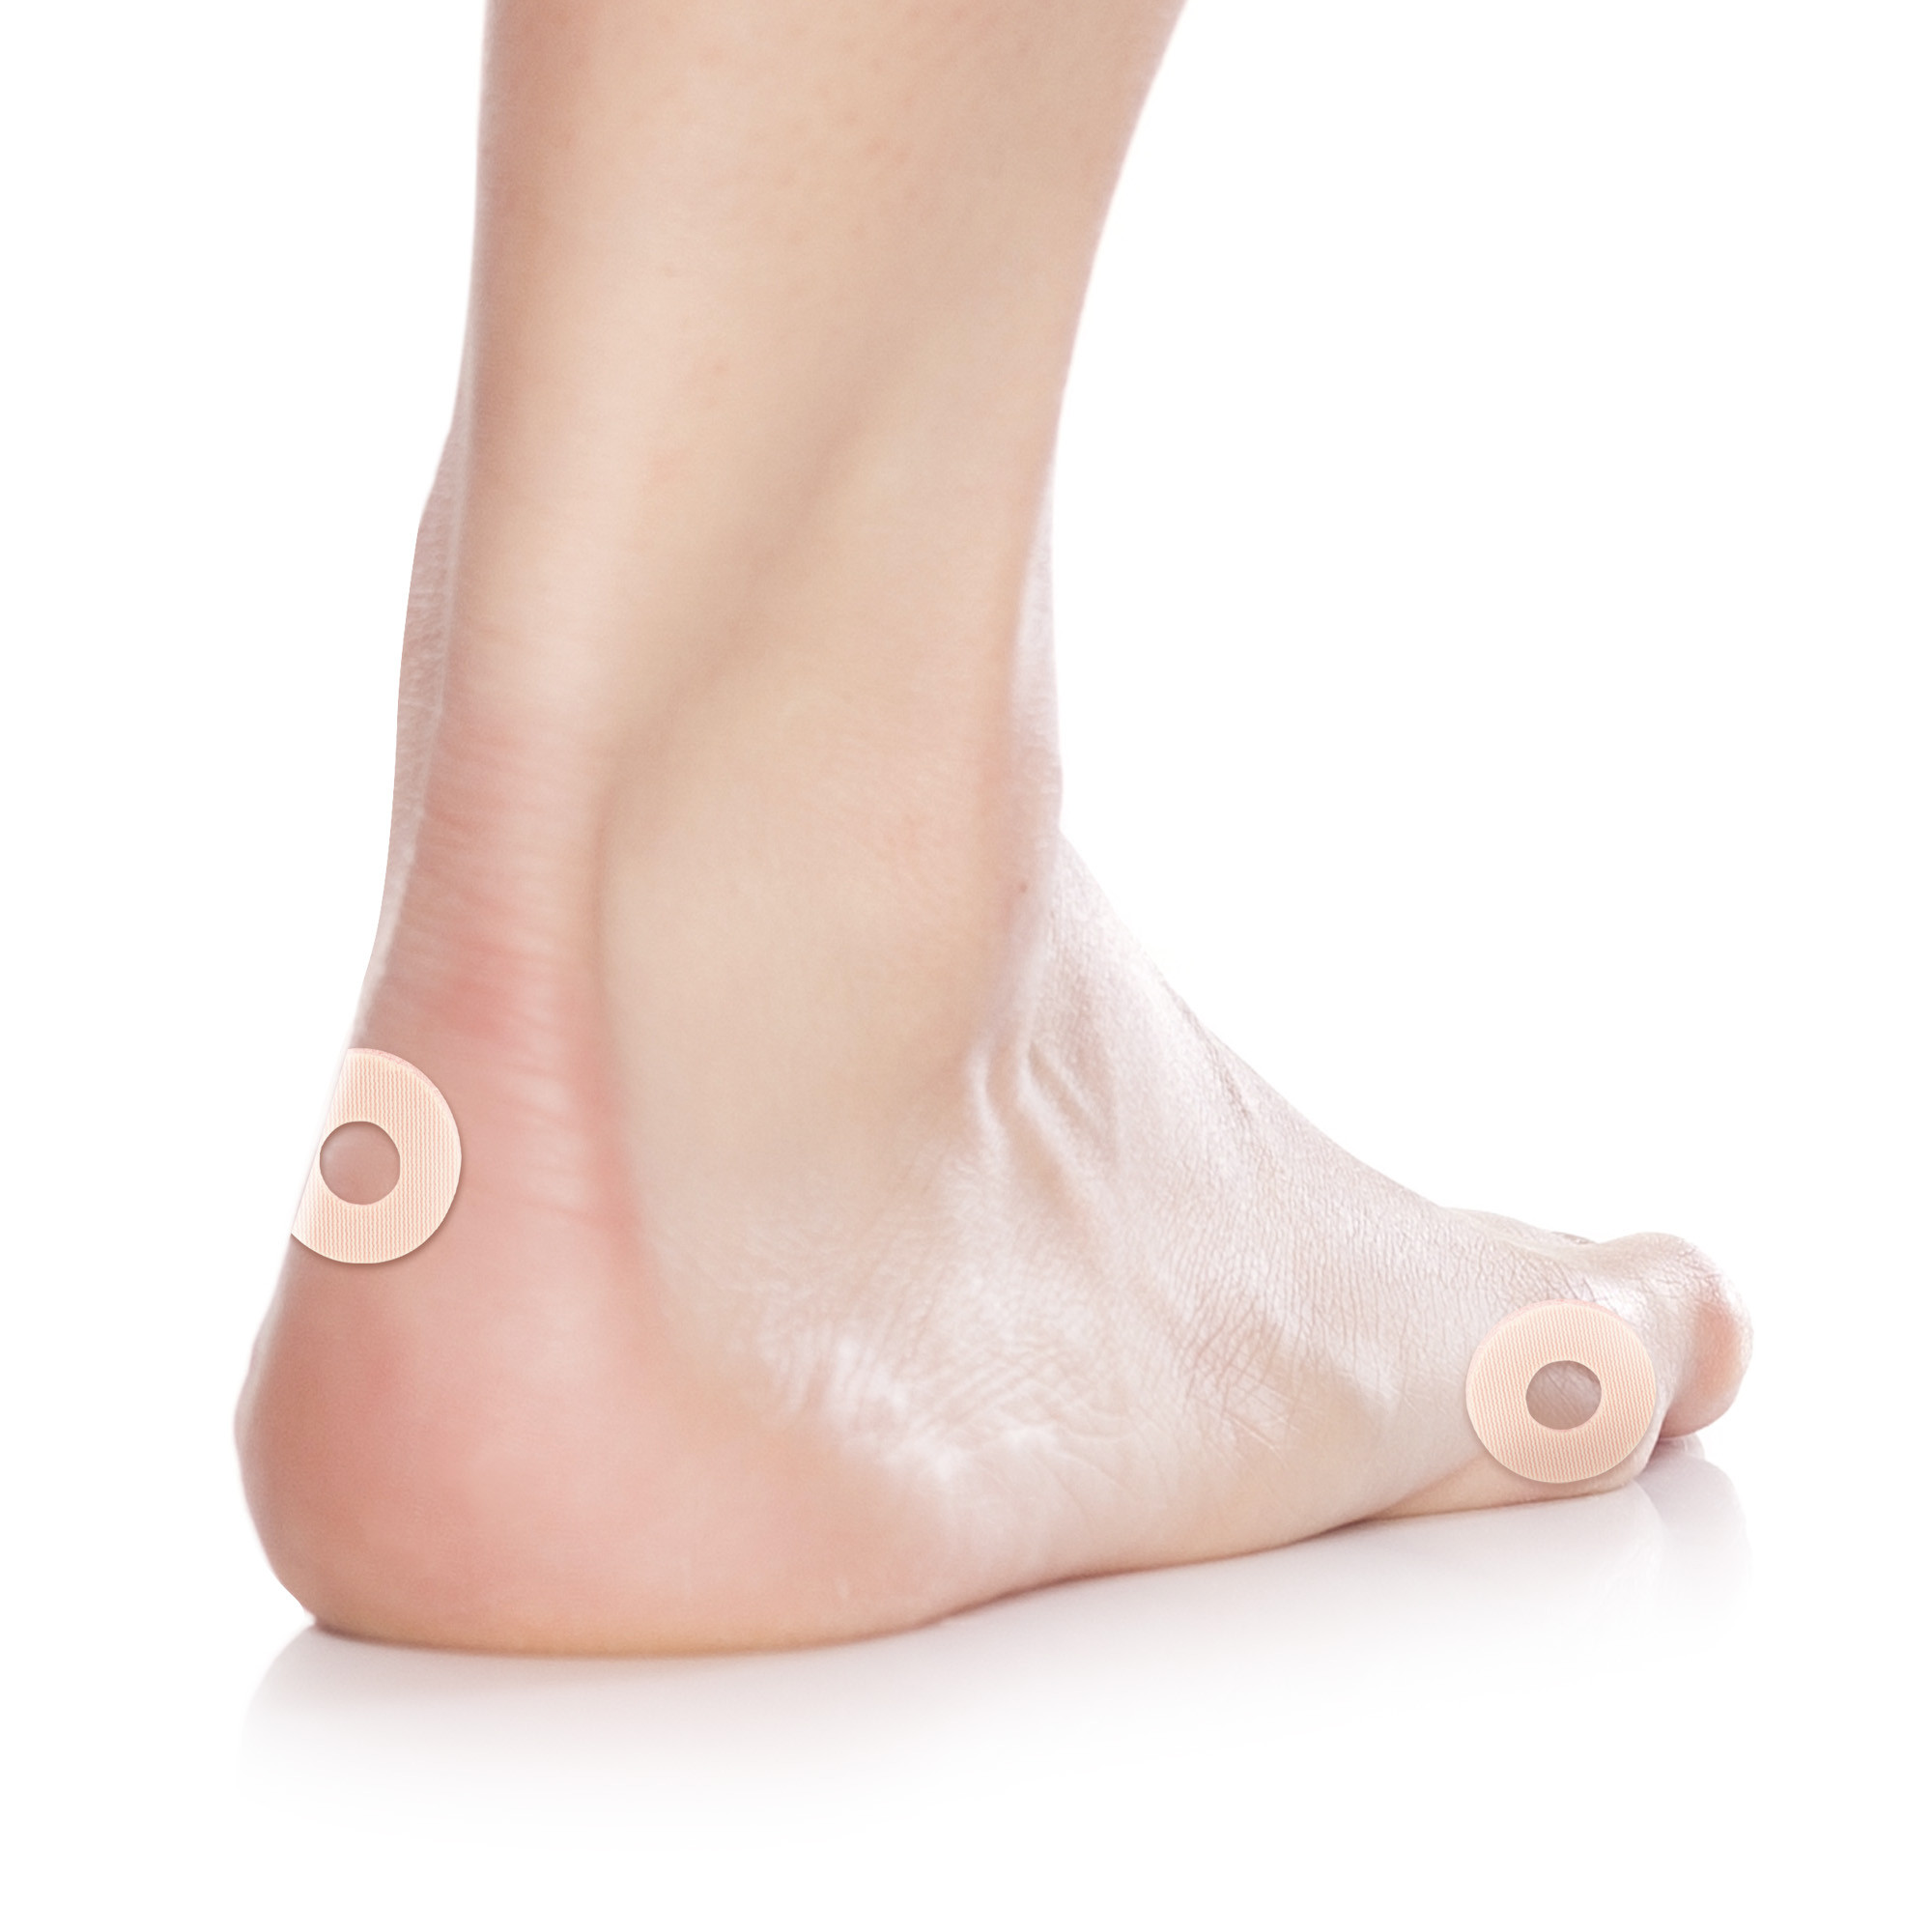 Large round latex foot protectors with central hole